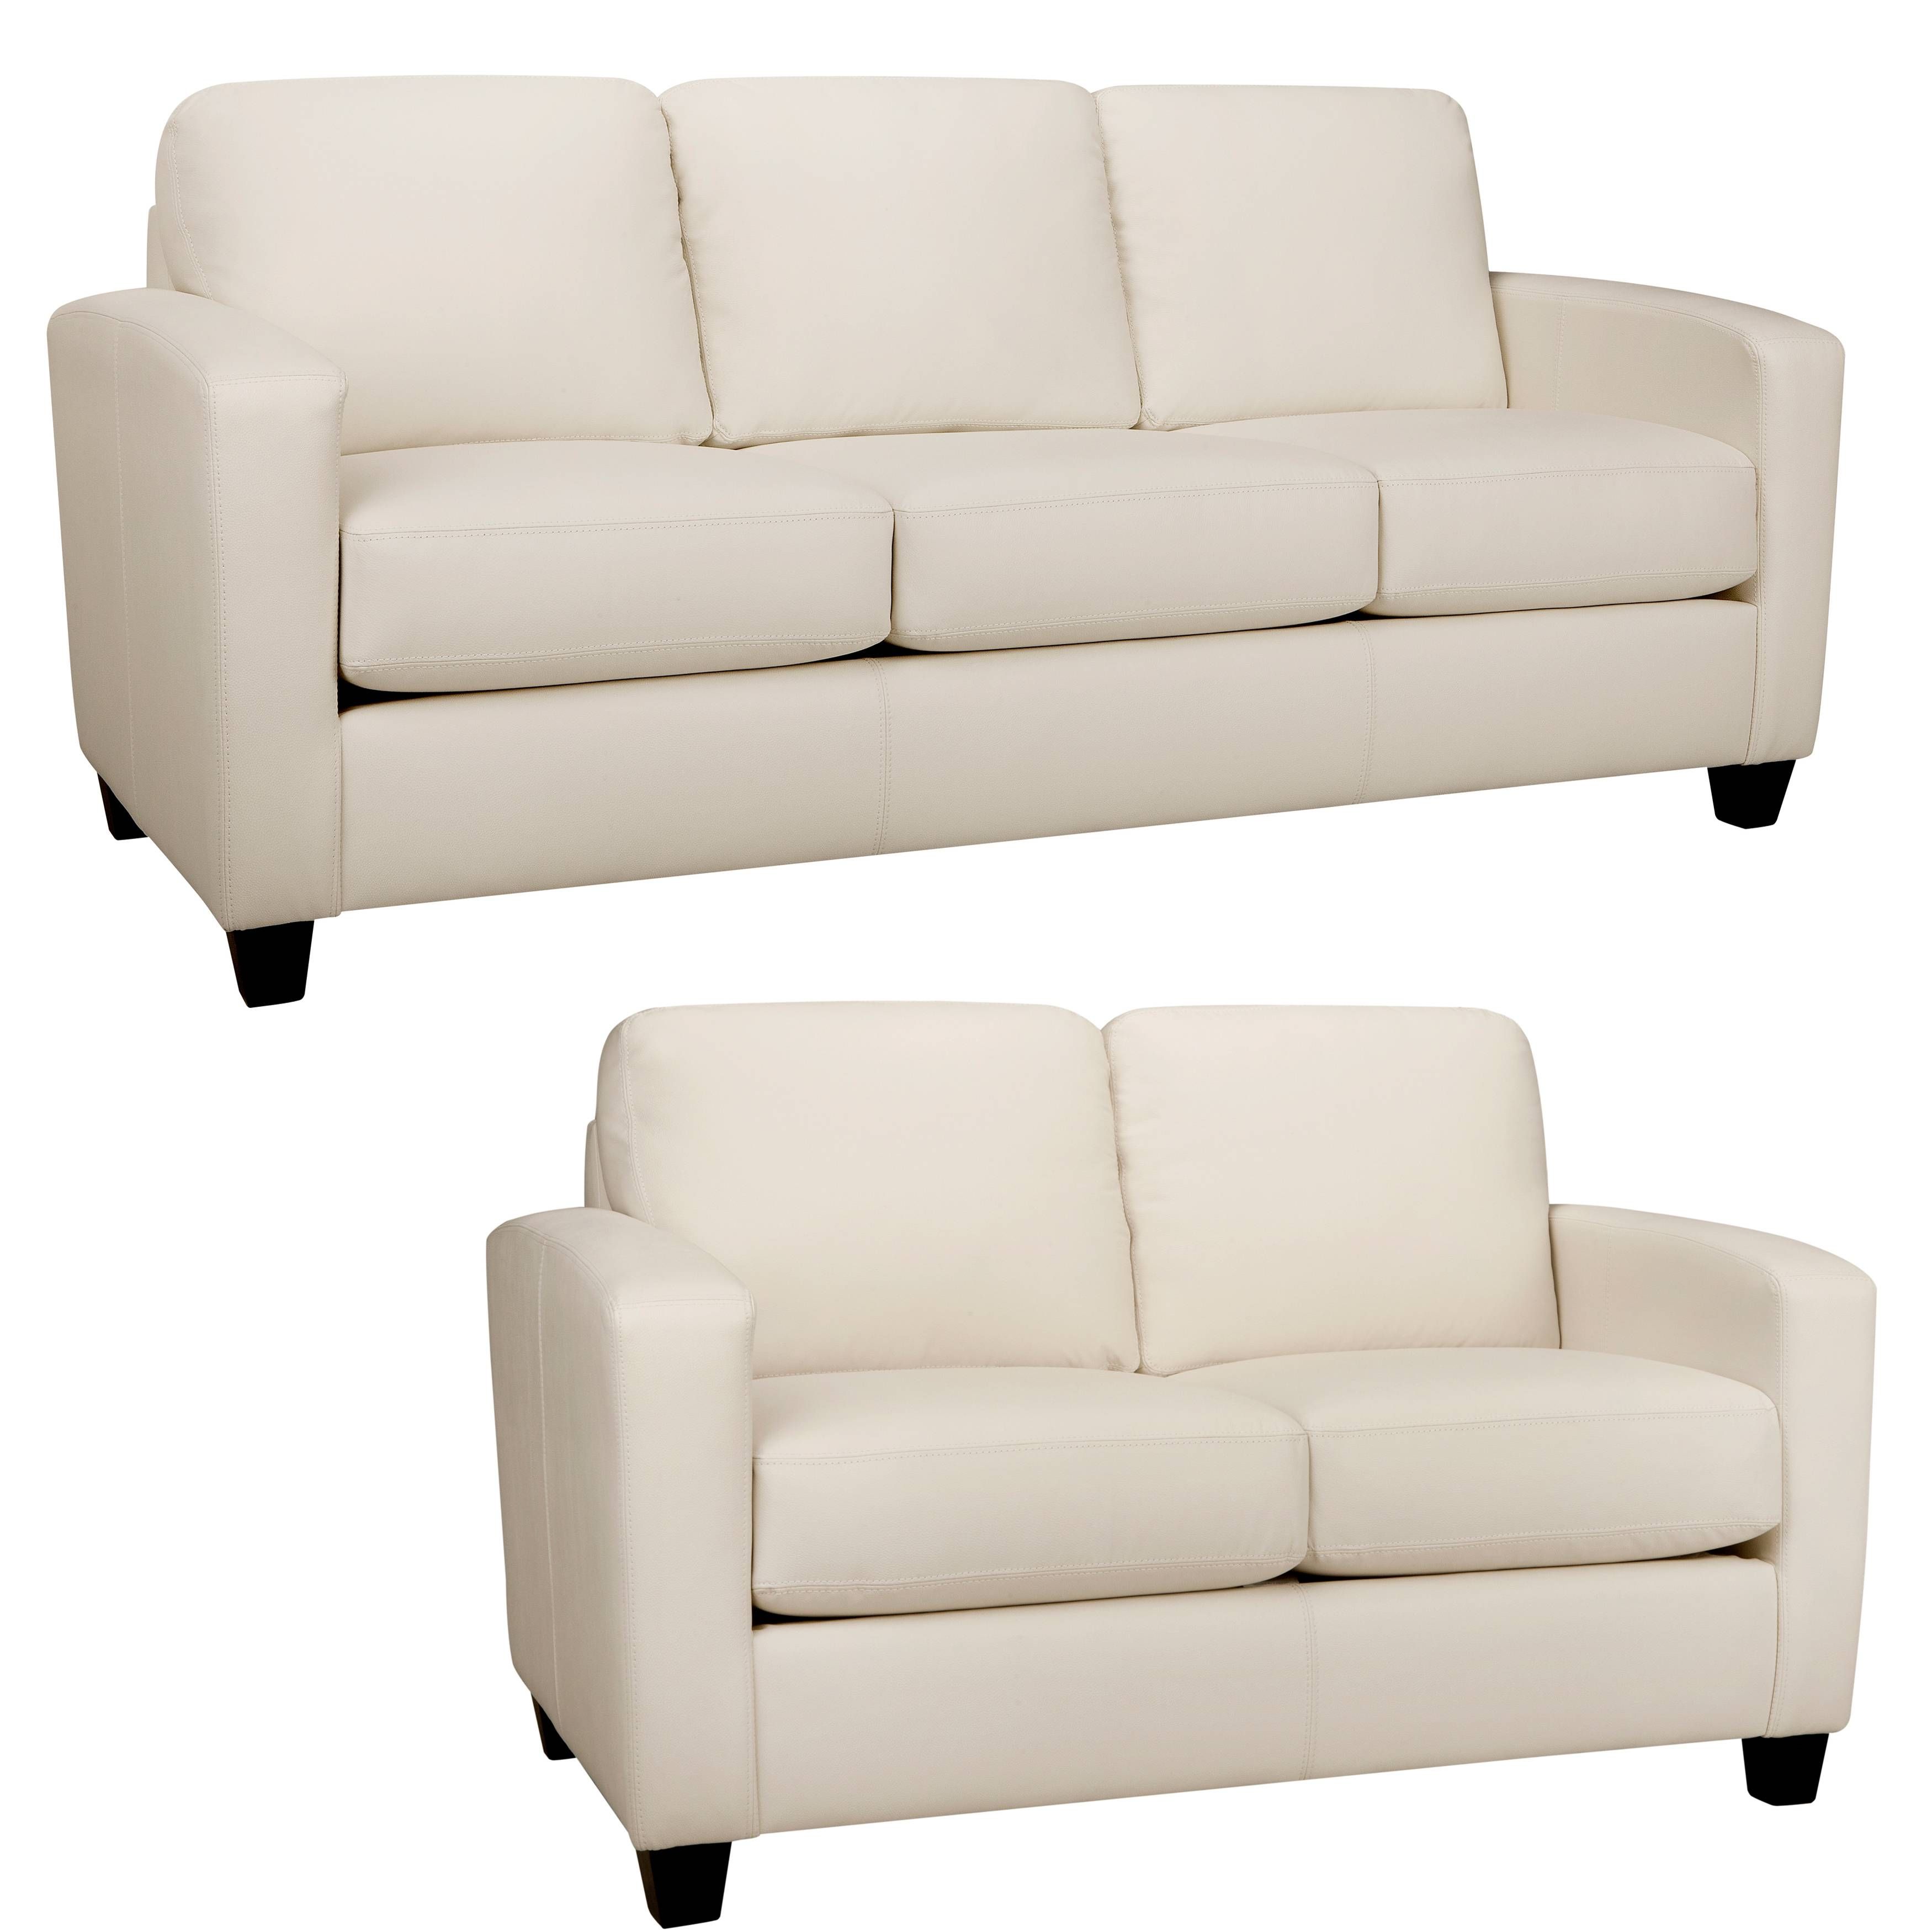 Off White Leather Sofa And Loveseat | Sofa Menzilperde With Regard To Off White Leather Sofa And Loveseat (Photo 23 of 30)